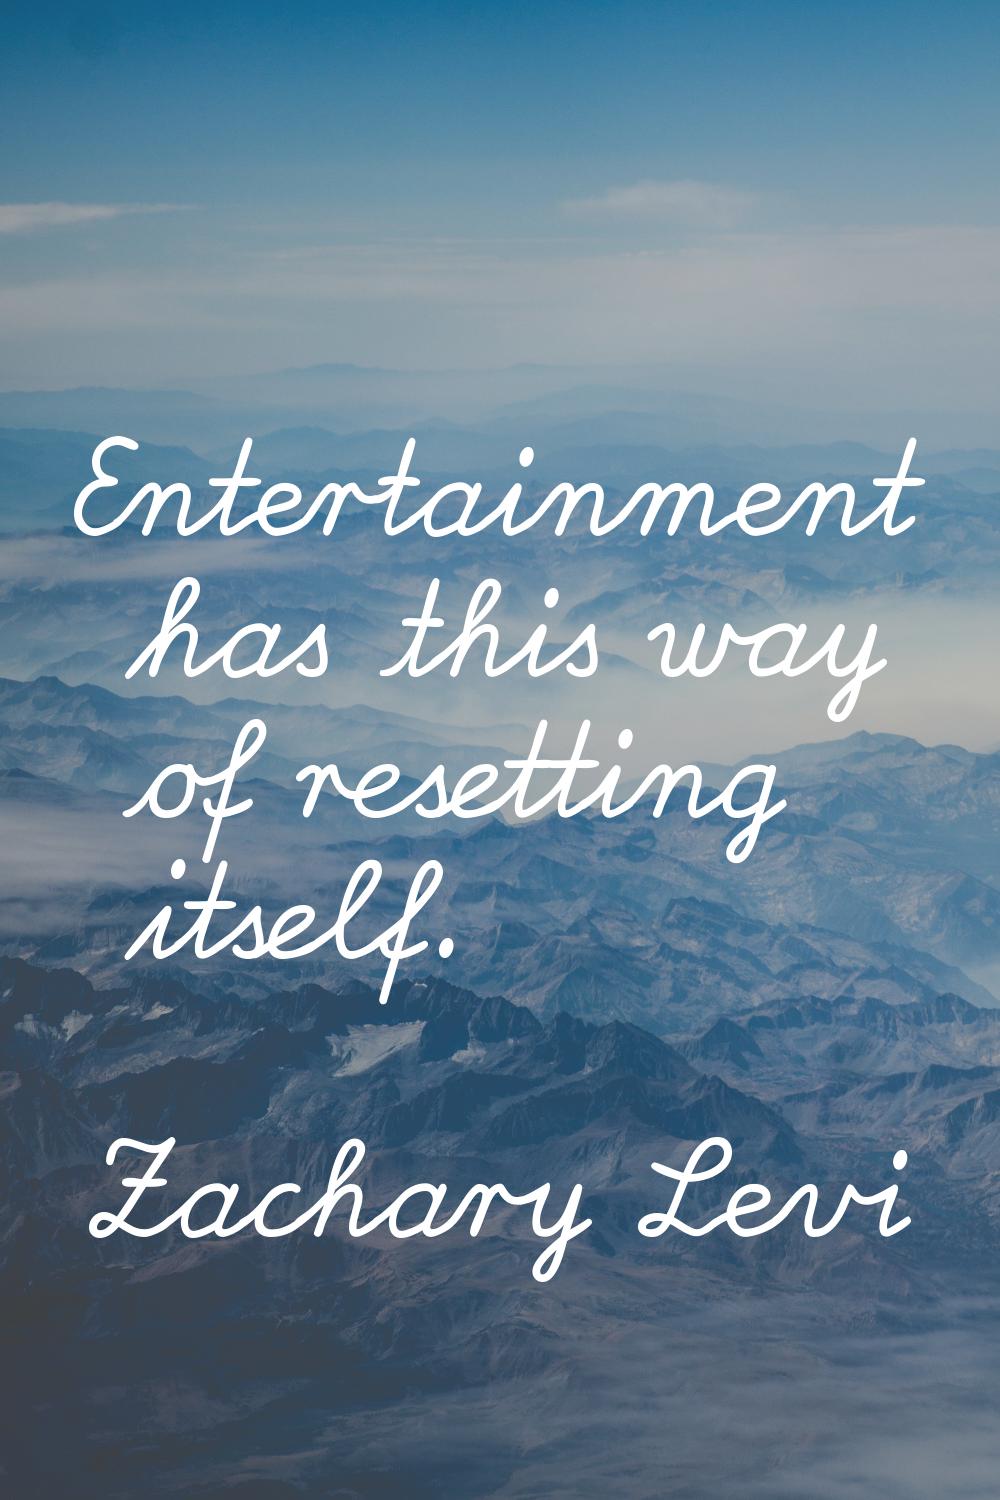 Entertainment has this way of resetting itself.